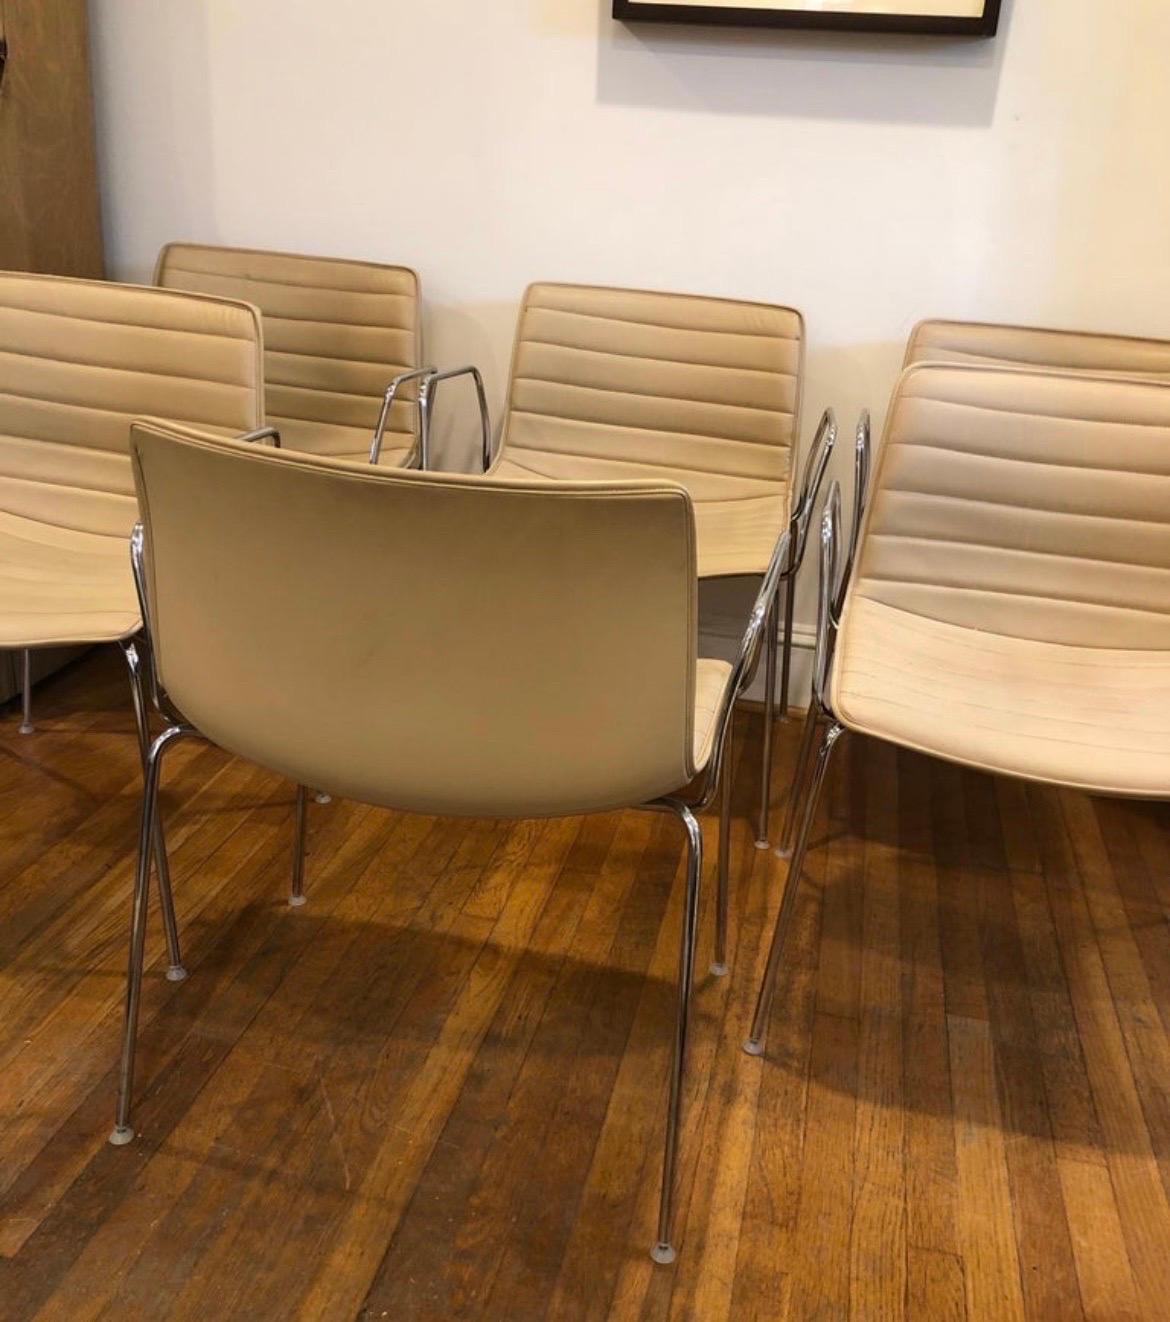 Modern Arper Catifa 53 Chairs - Tan Leather with Steel Base and Arms - 10 Available For Sale